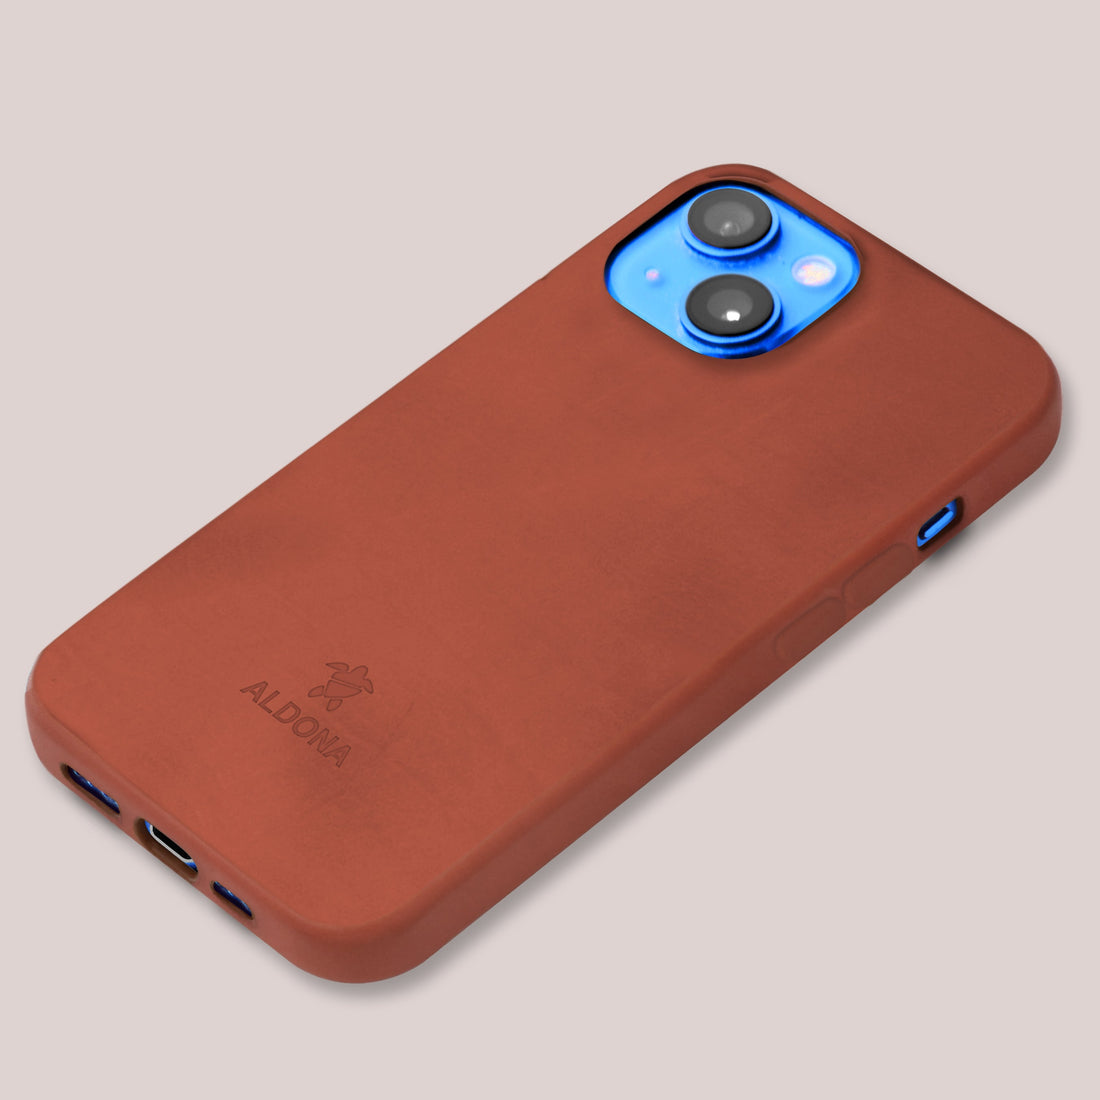 Kalon Case for iPhone 12 with MagSafe Compatibility - Vintage Tan